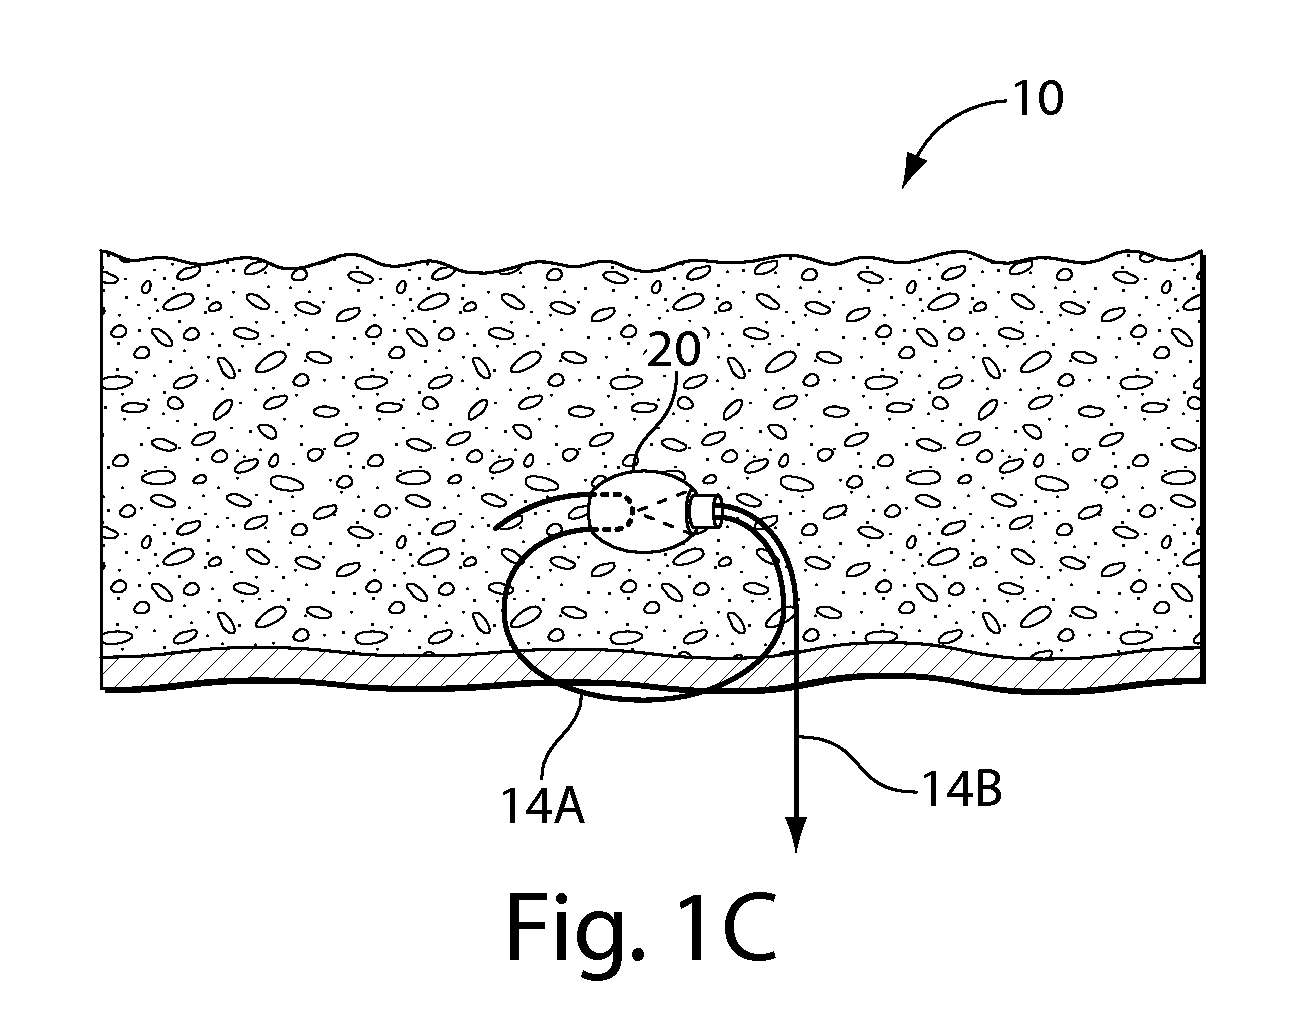 Systems and methods for soft tissue reconstruction